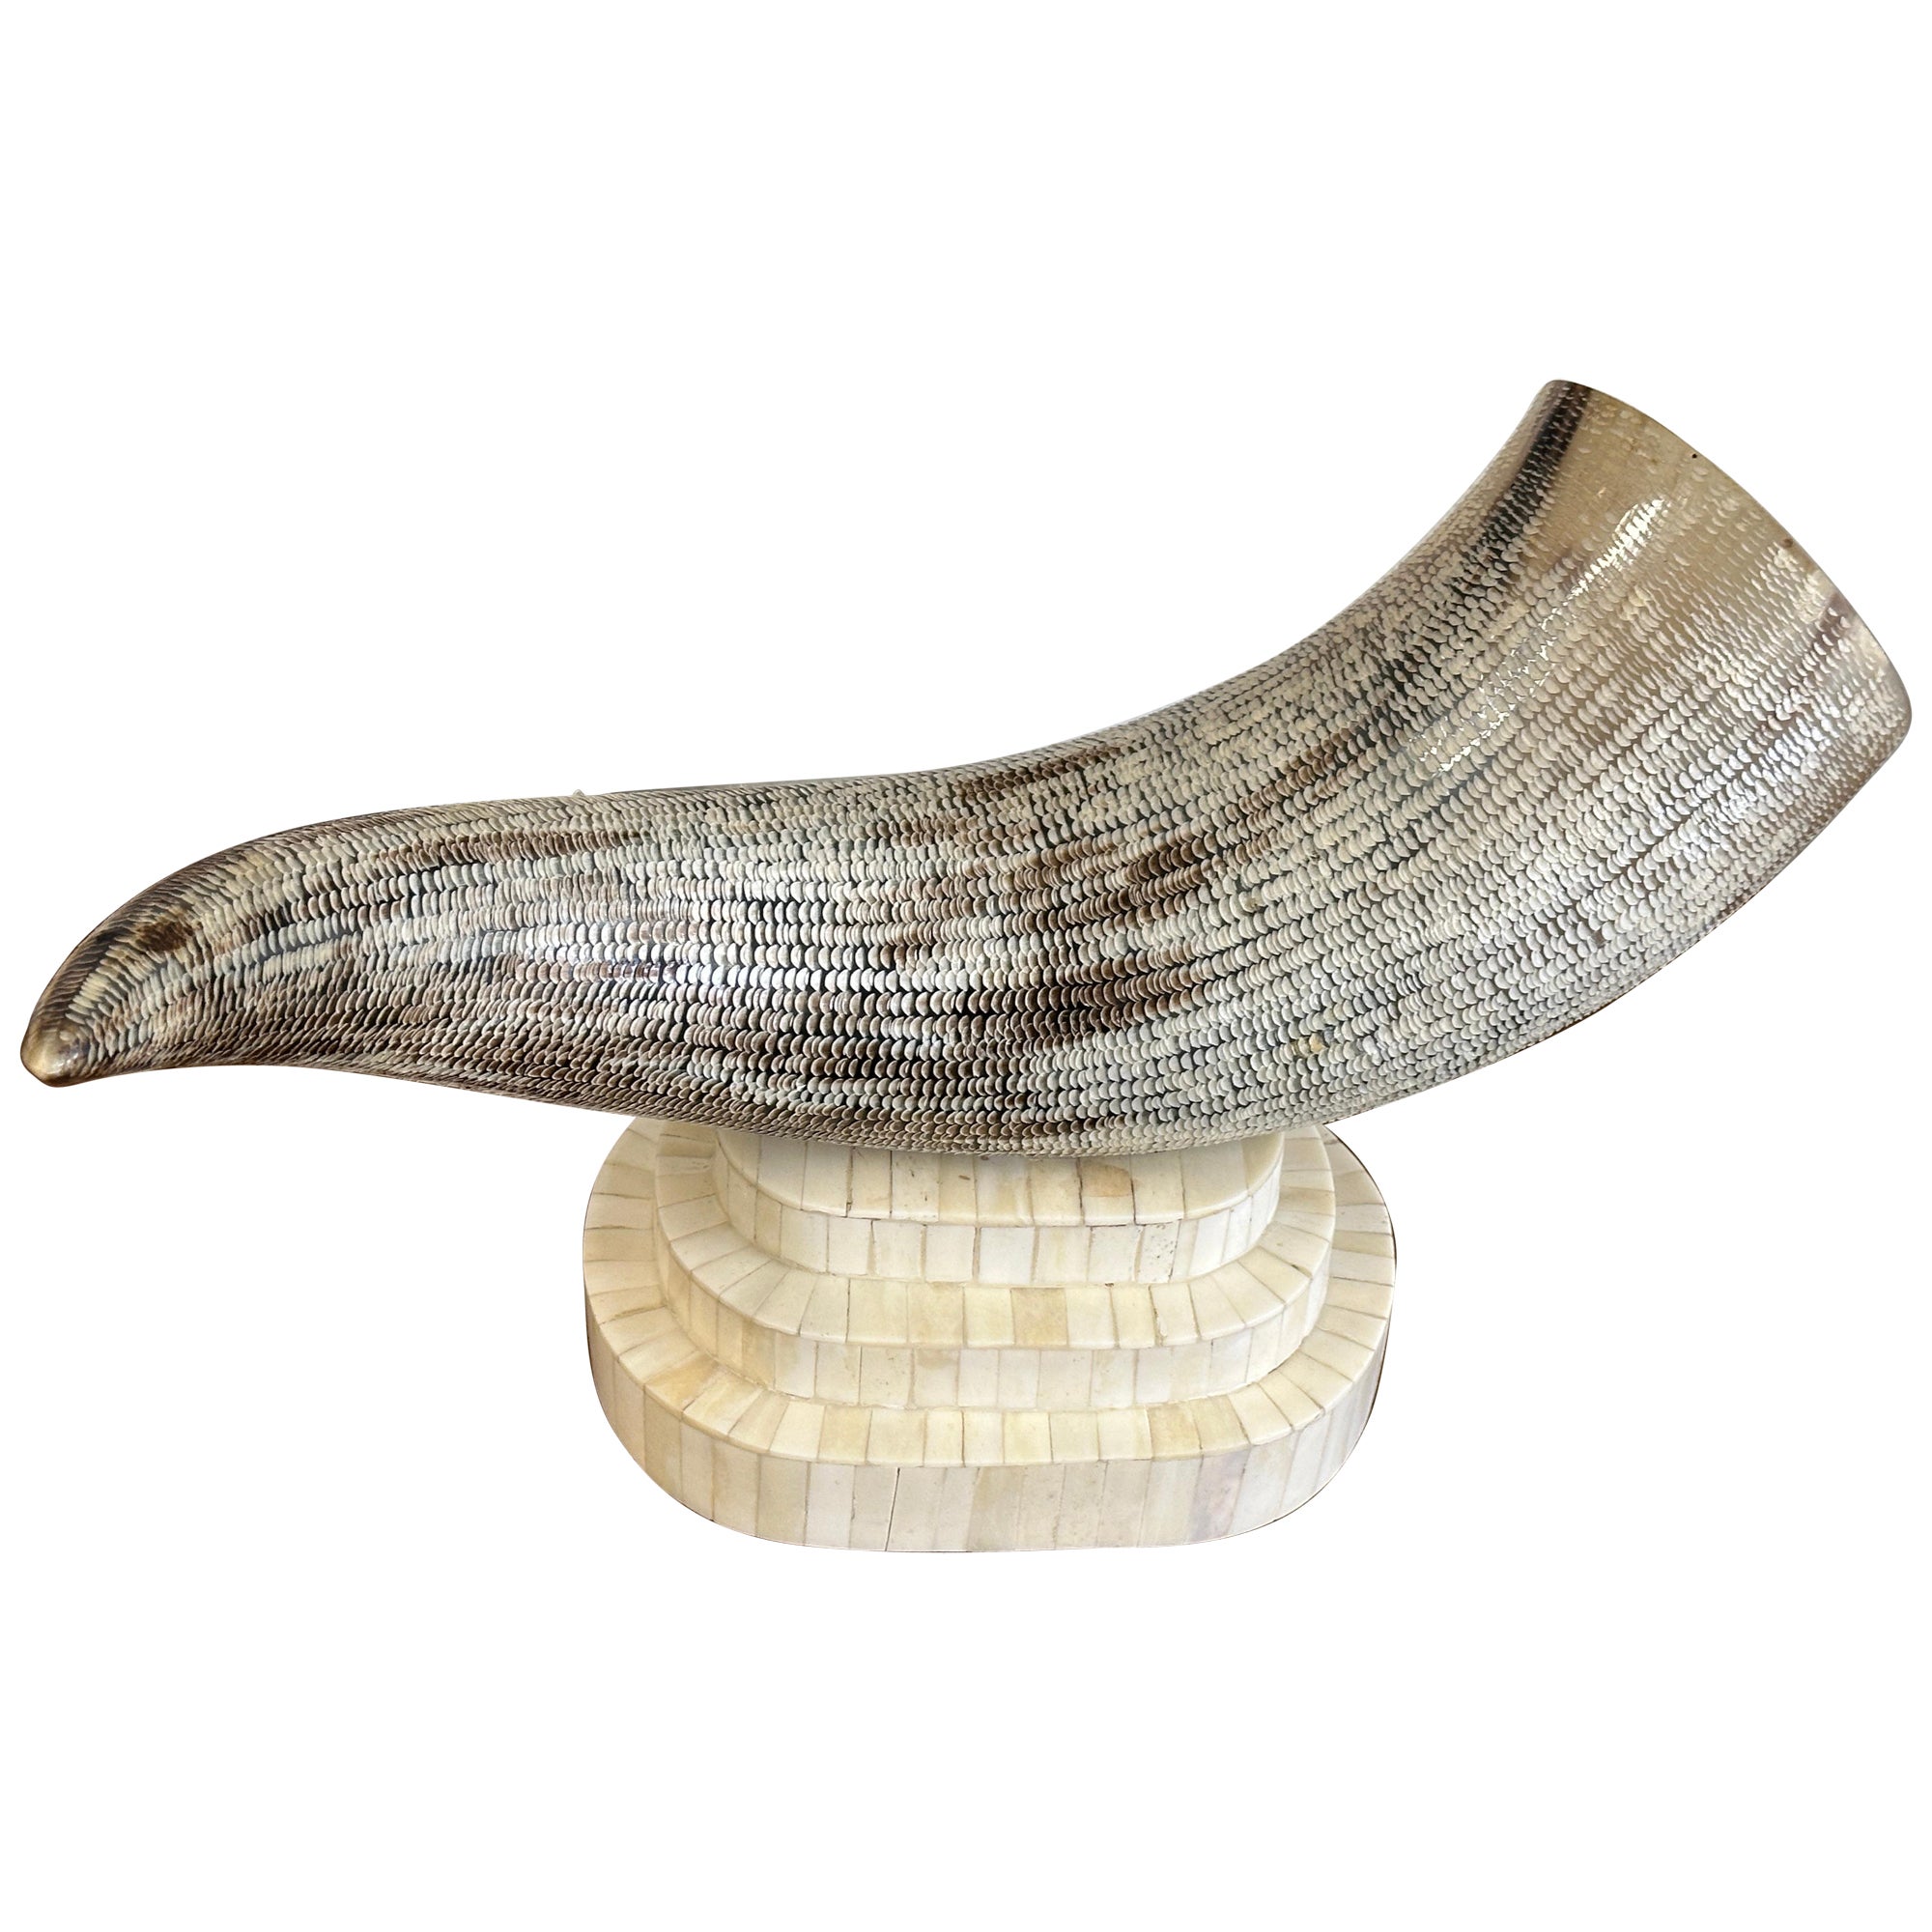 Carved Etched Horn Mounted on a Tesselated Bone Base